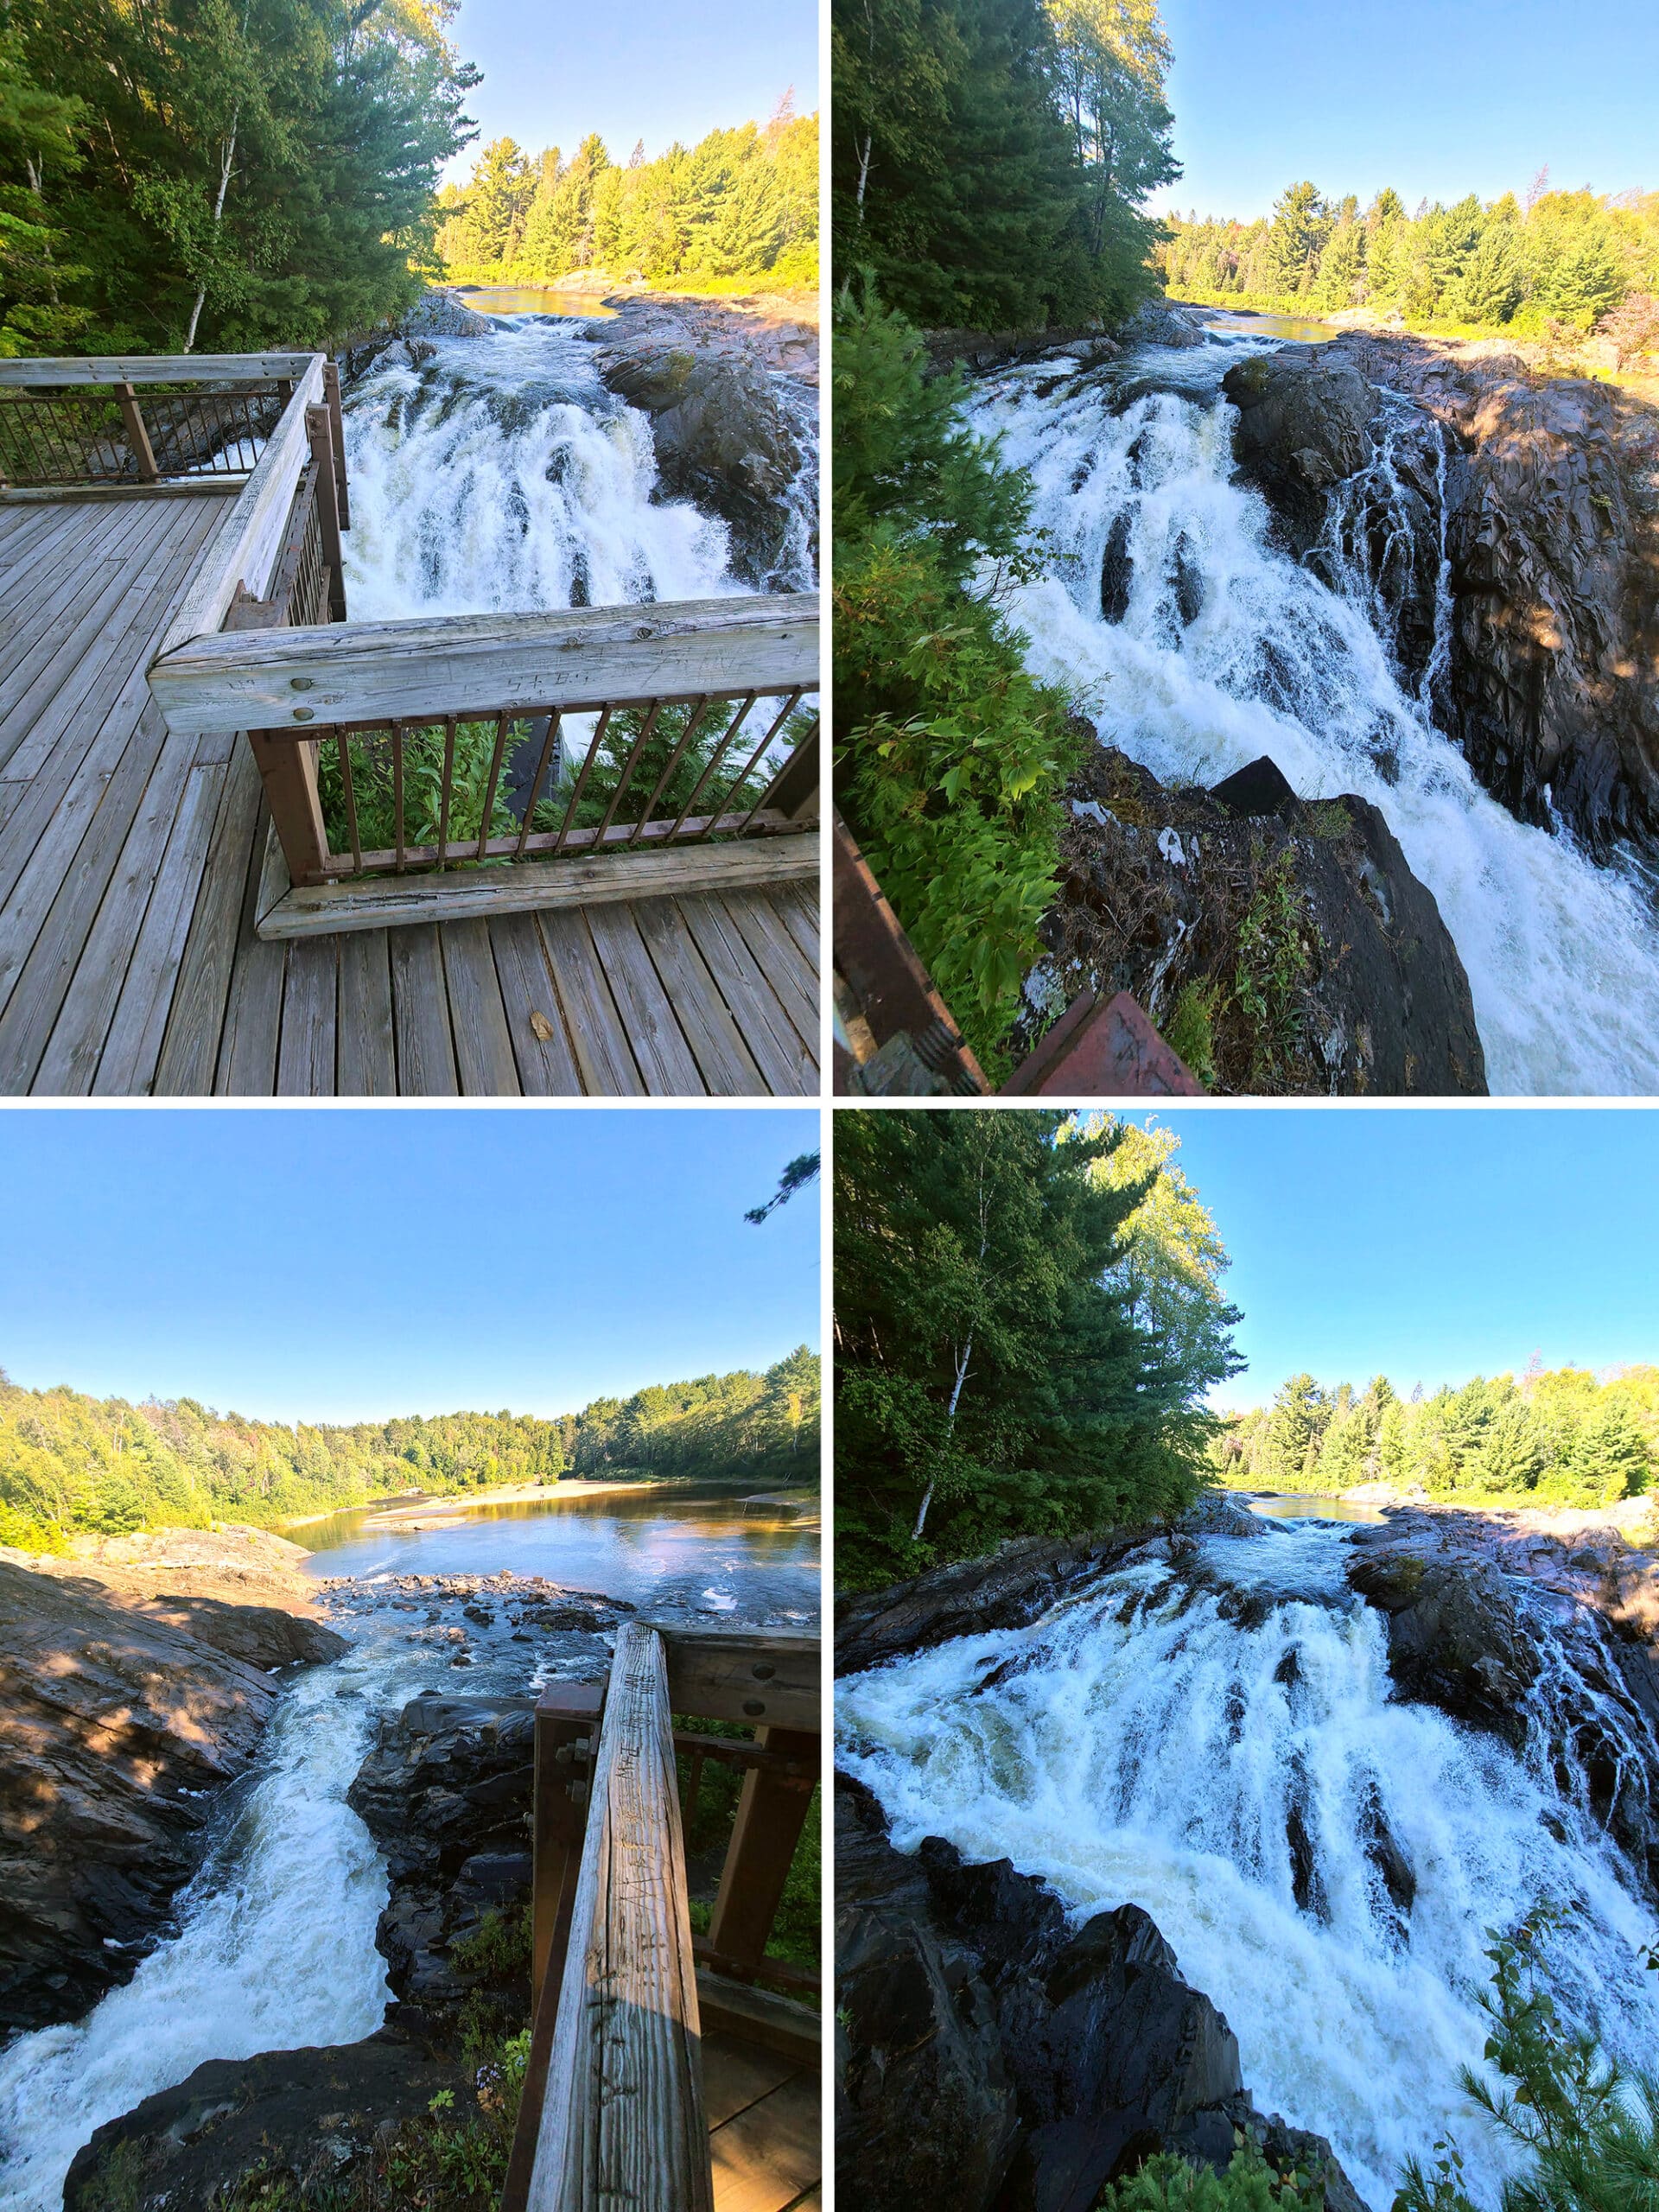 2 part image showing different views of the waterfall at Chutes.